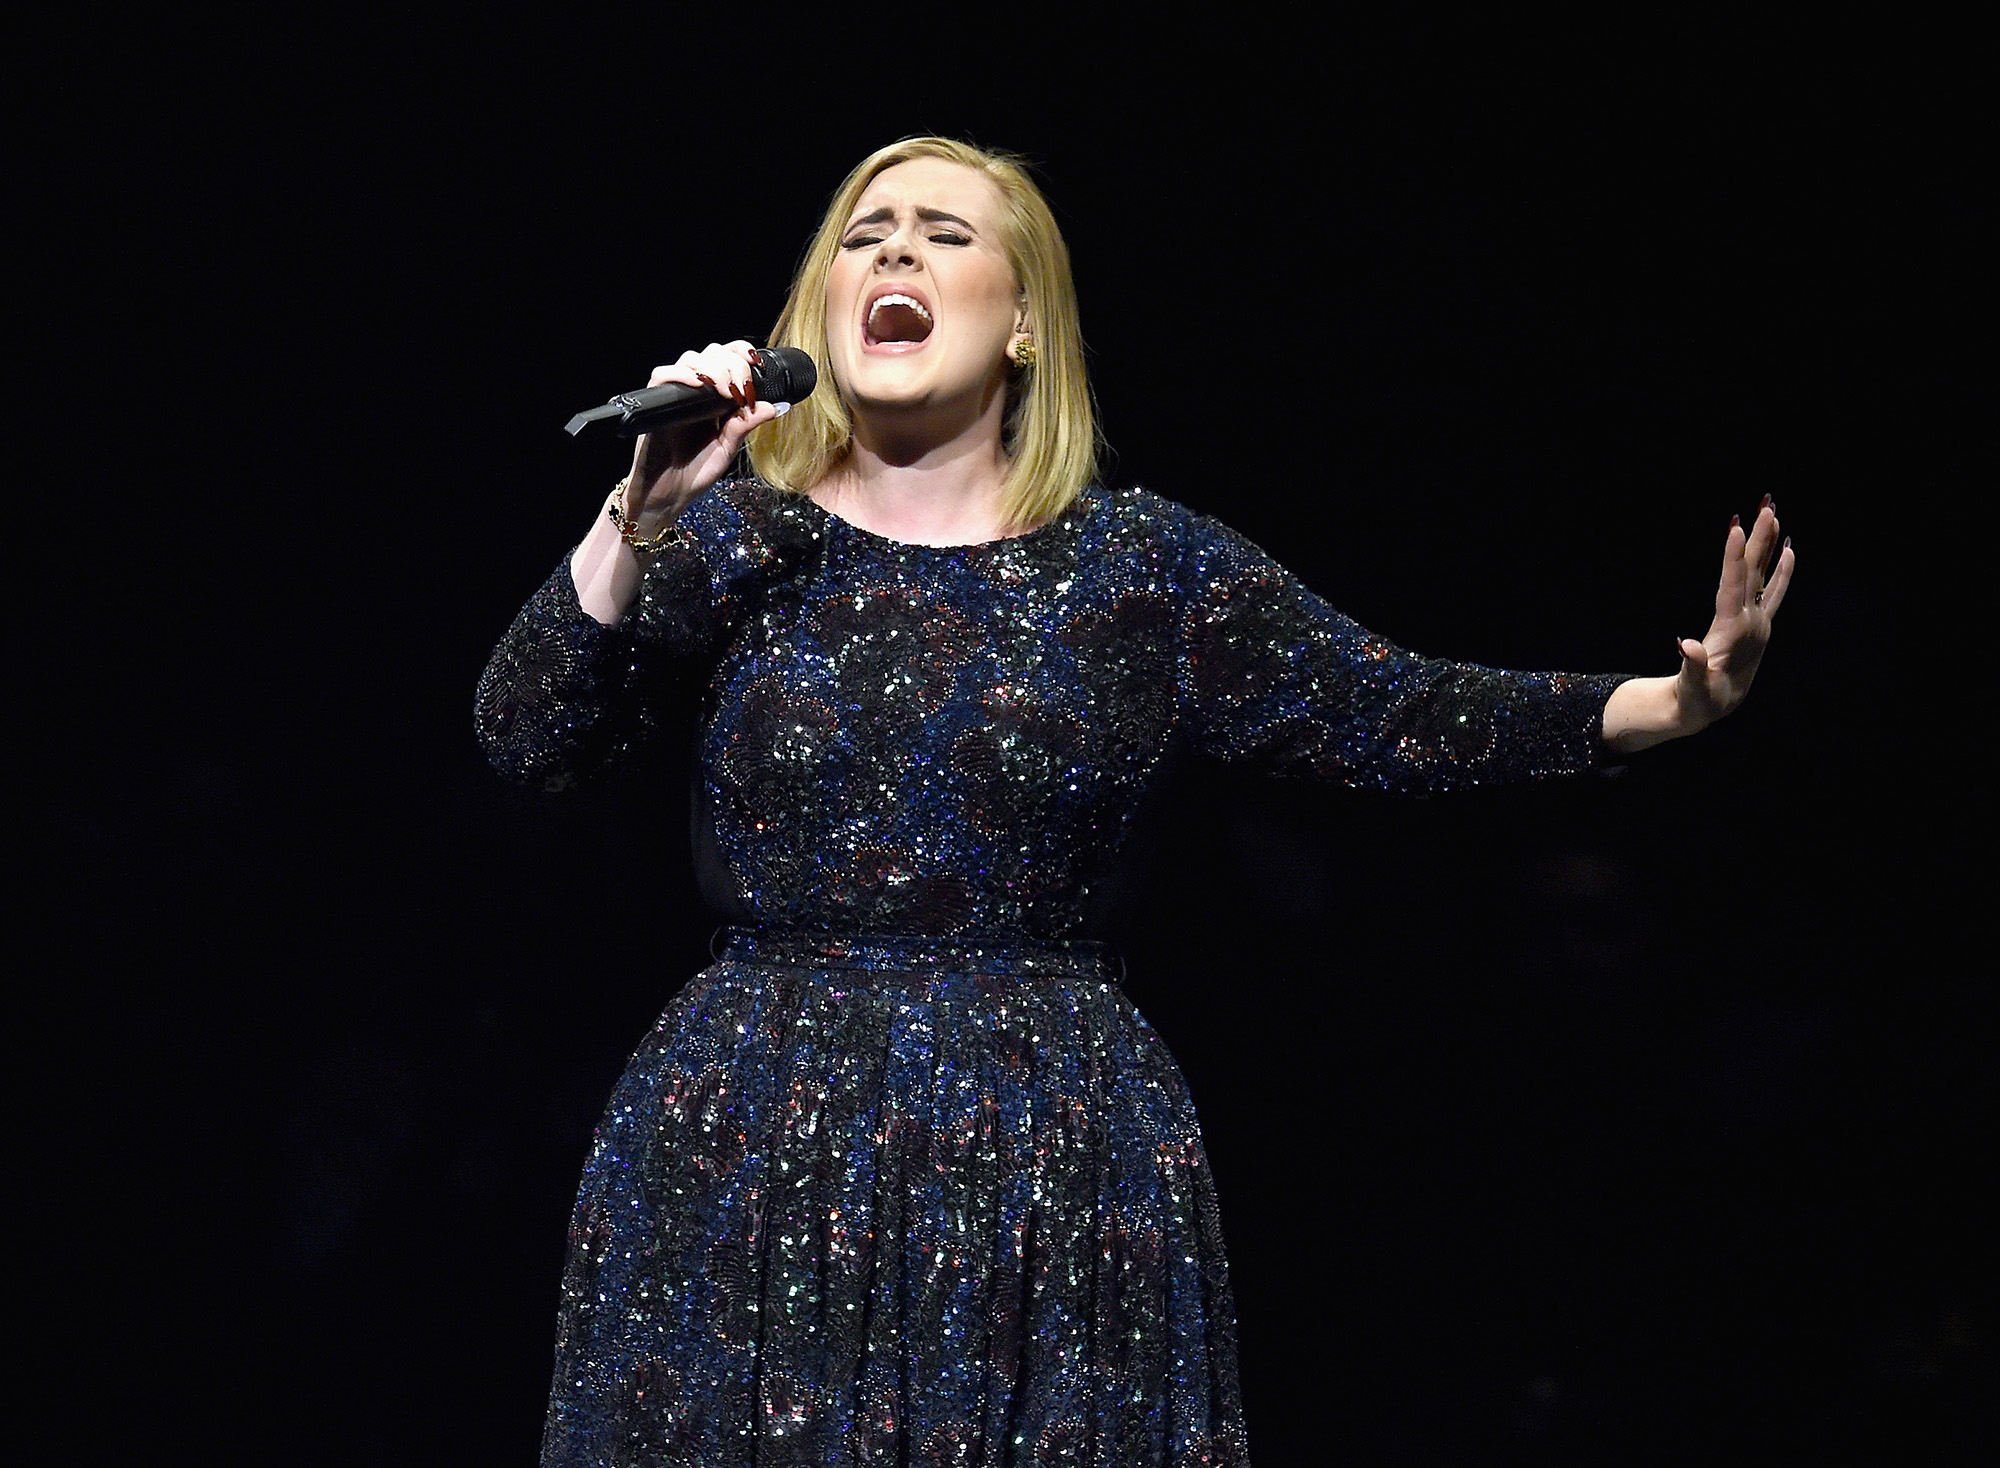 Adele performs on stage during her North American tour at Staples Center on August 5, 2016 in Los Angeles, California.  (Photo by Kevin Winter/Getty Images for BT PR) (Kevin Winter&mdash;Getty Images for BT PR)